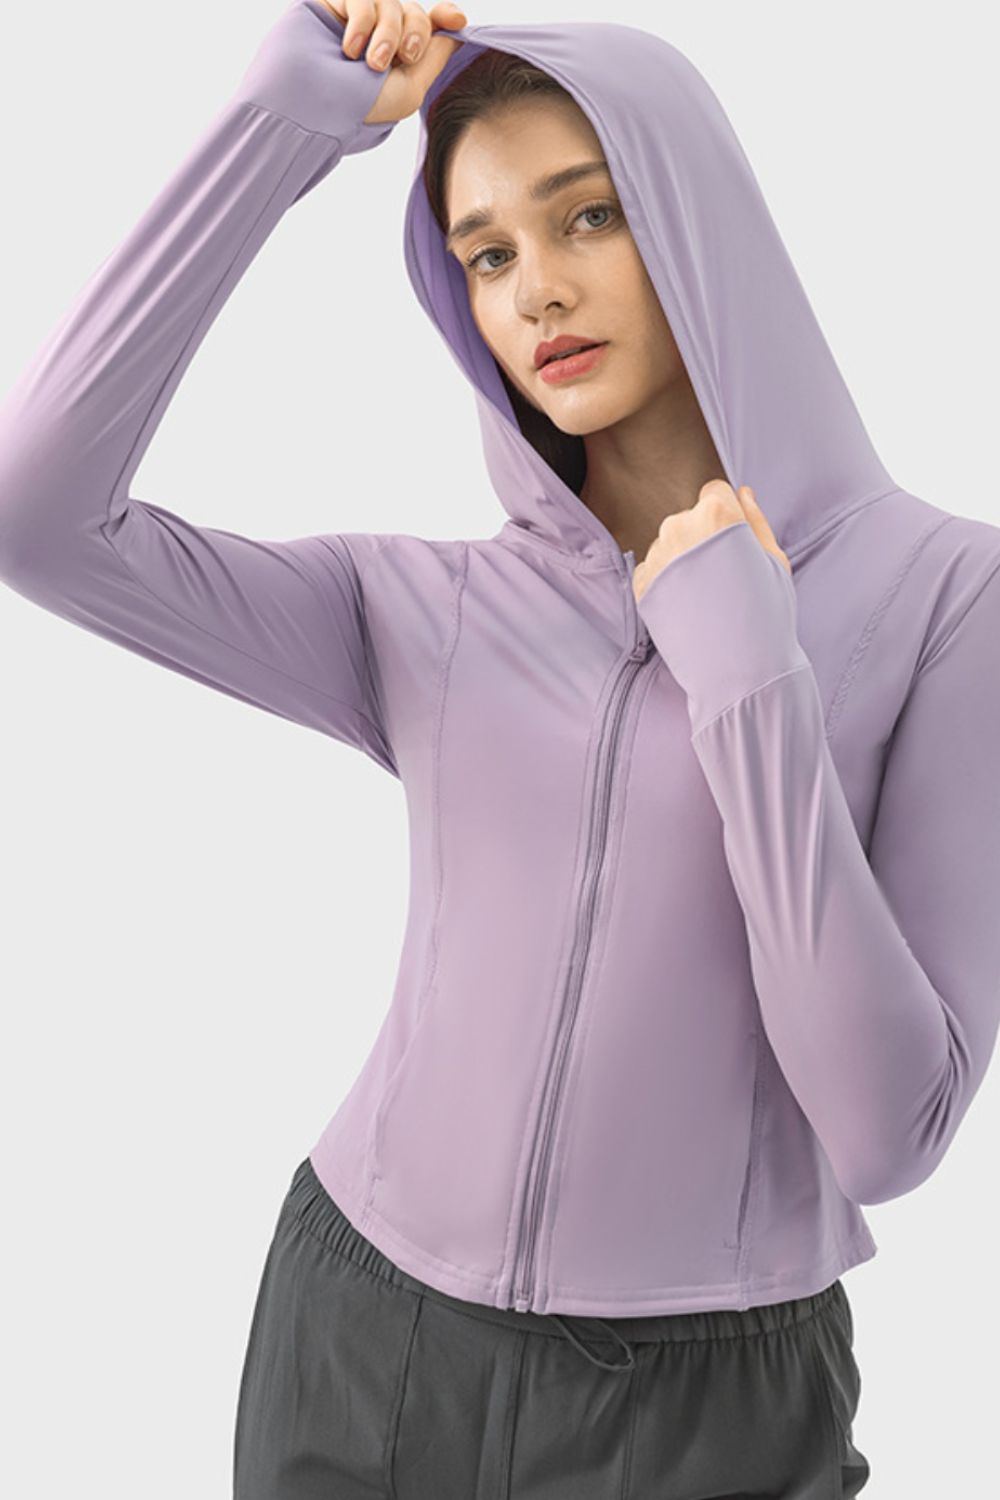 Pocketed Zip Up Hooded Long Sleeve Active Outerwear - OMG! Rose